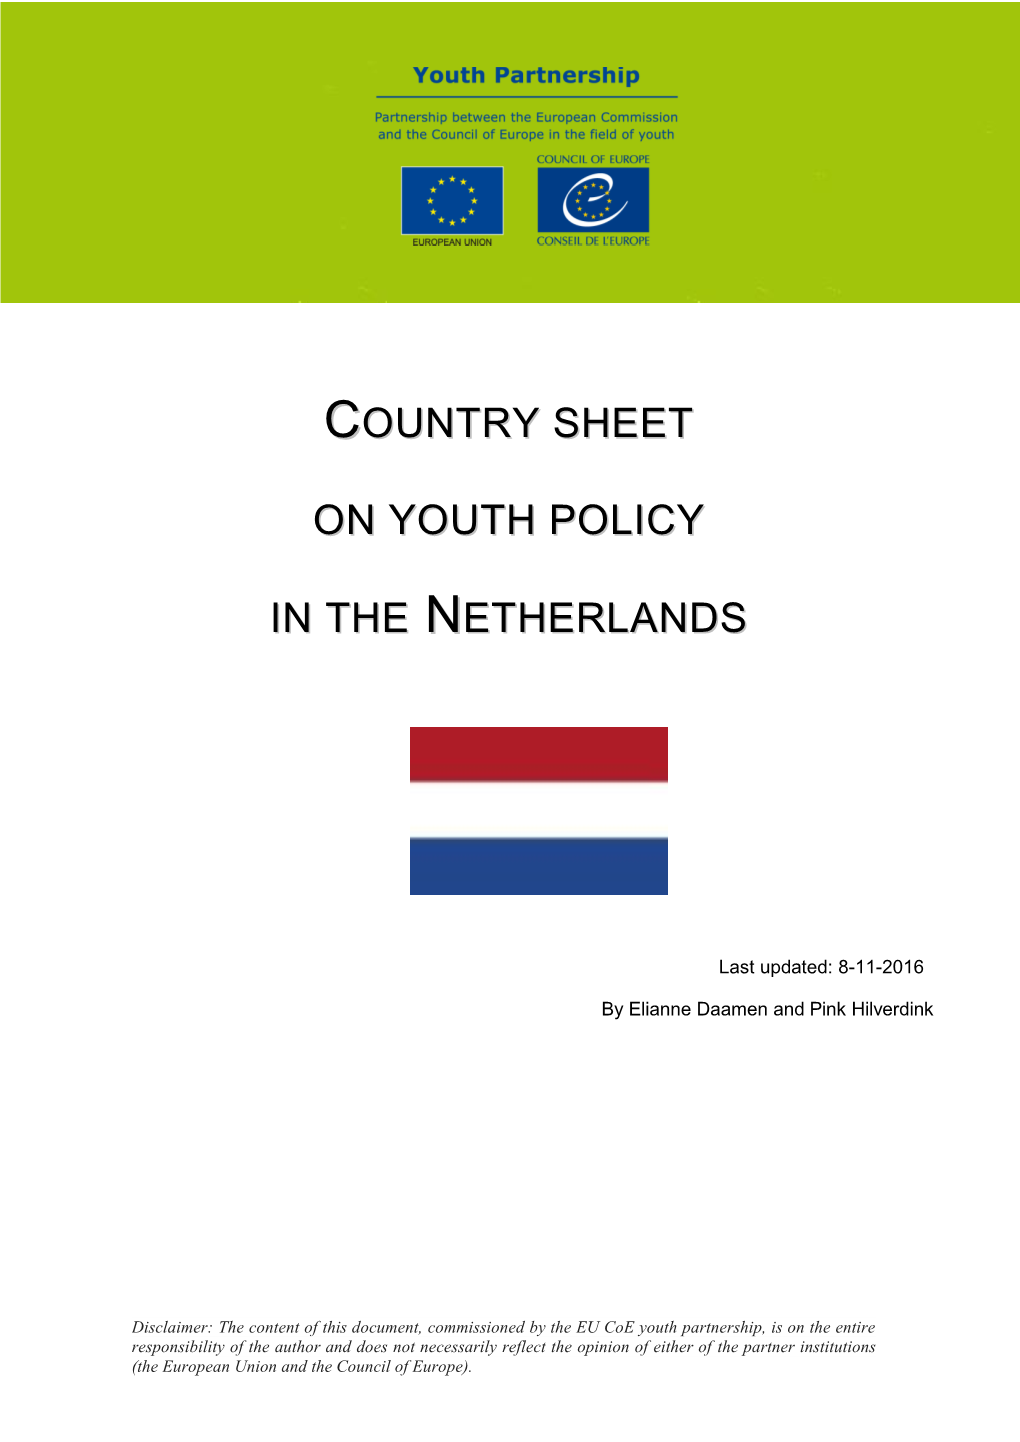 Background Information on Dutch Youth Policy